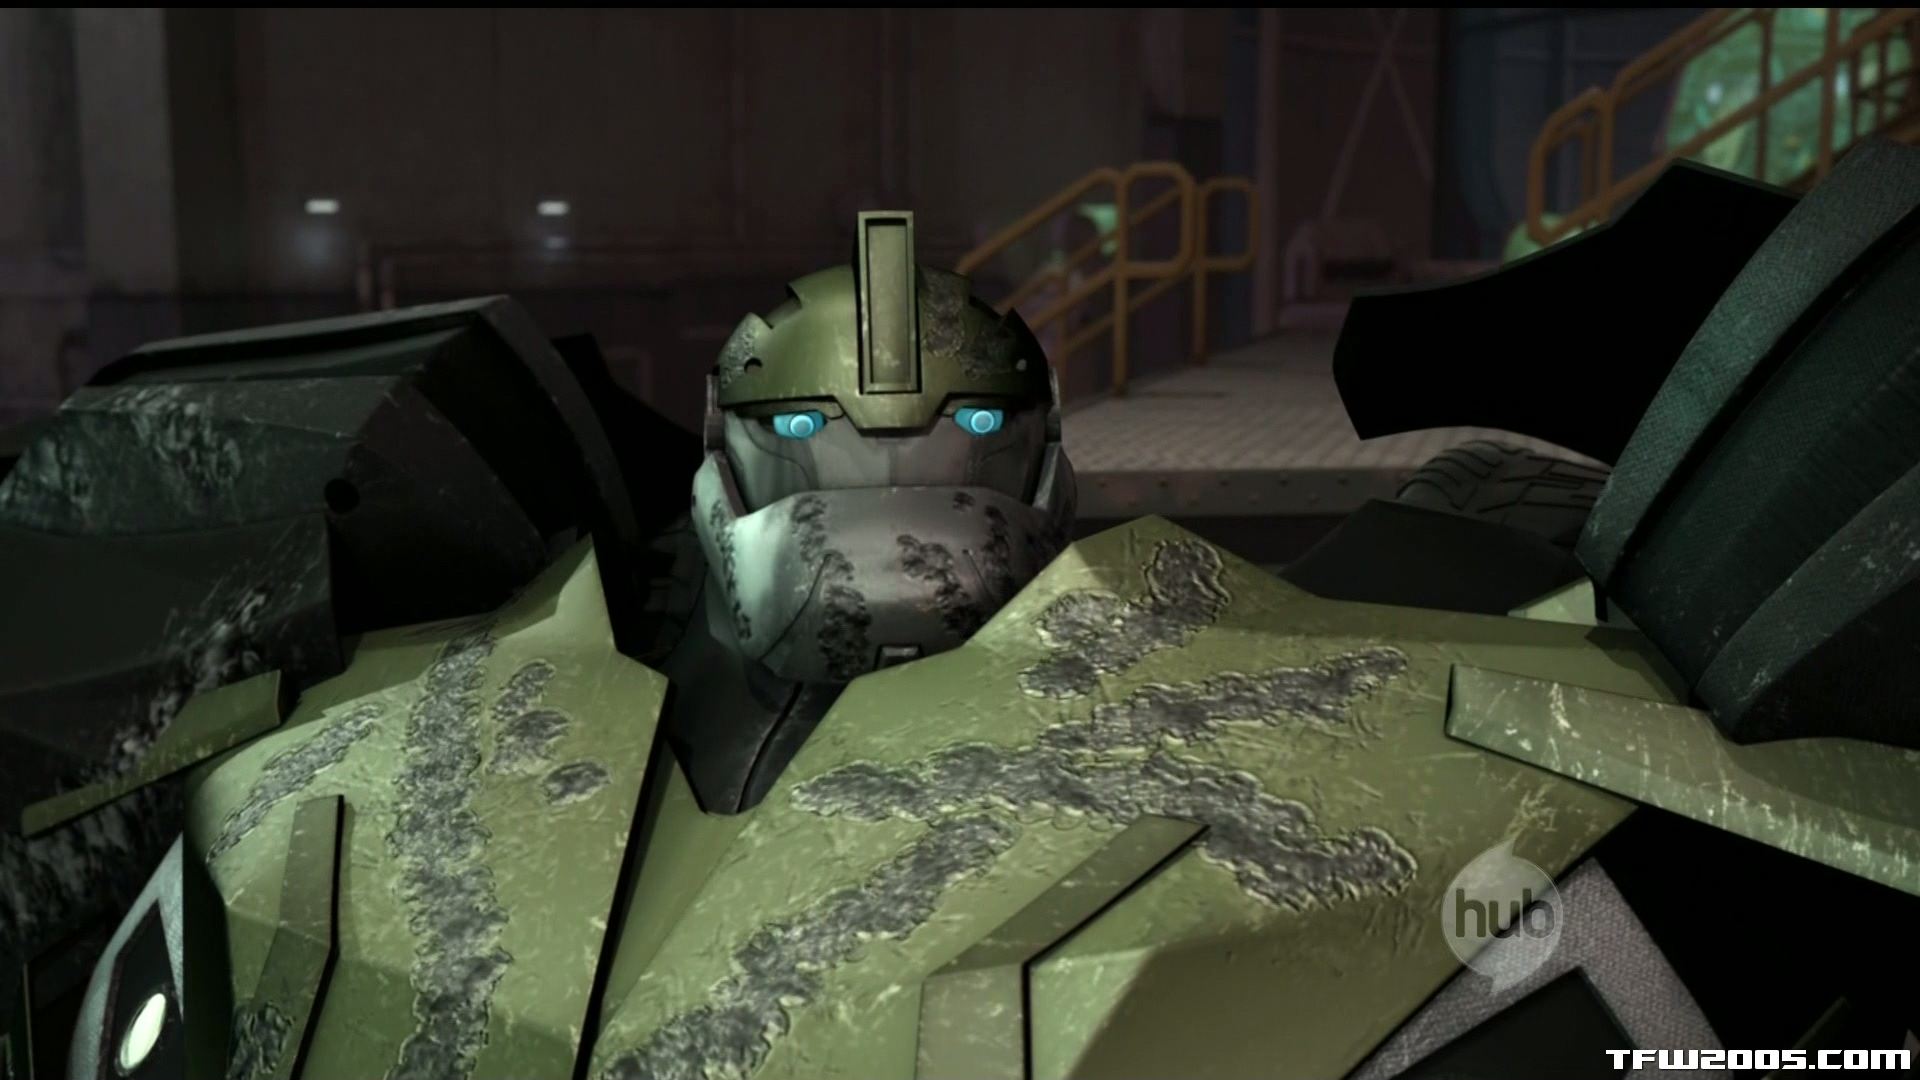 Transformers Prime Overview